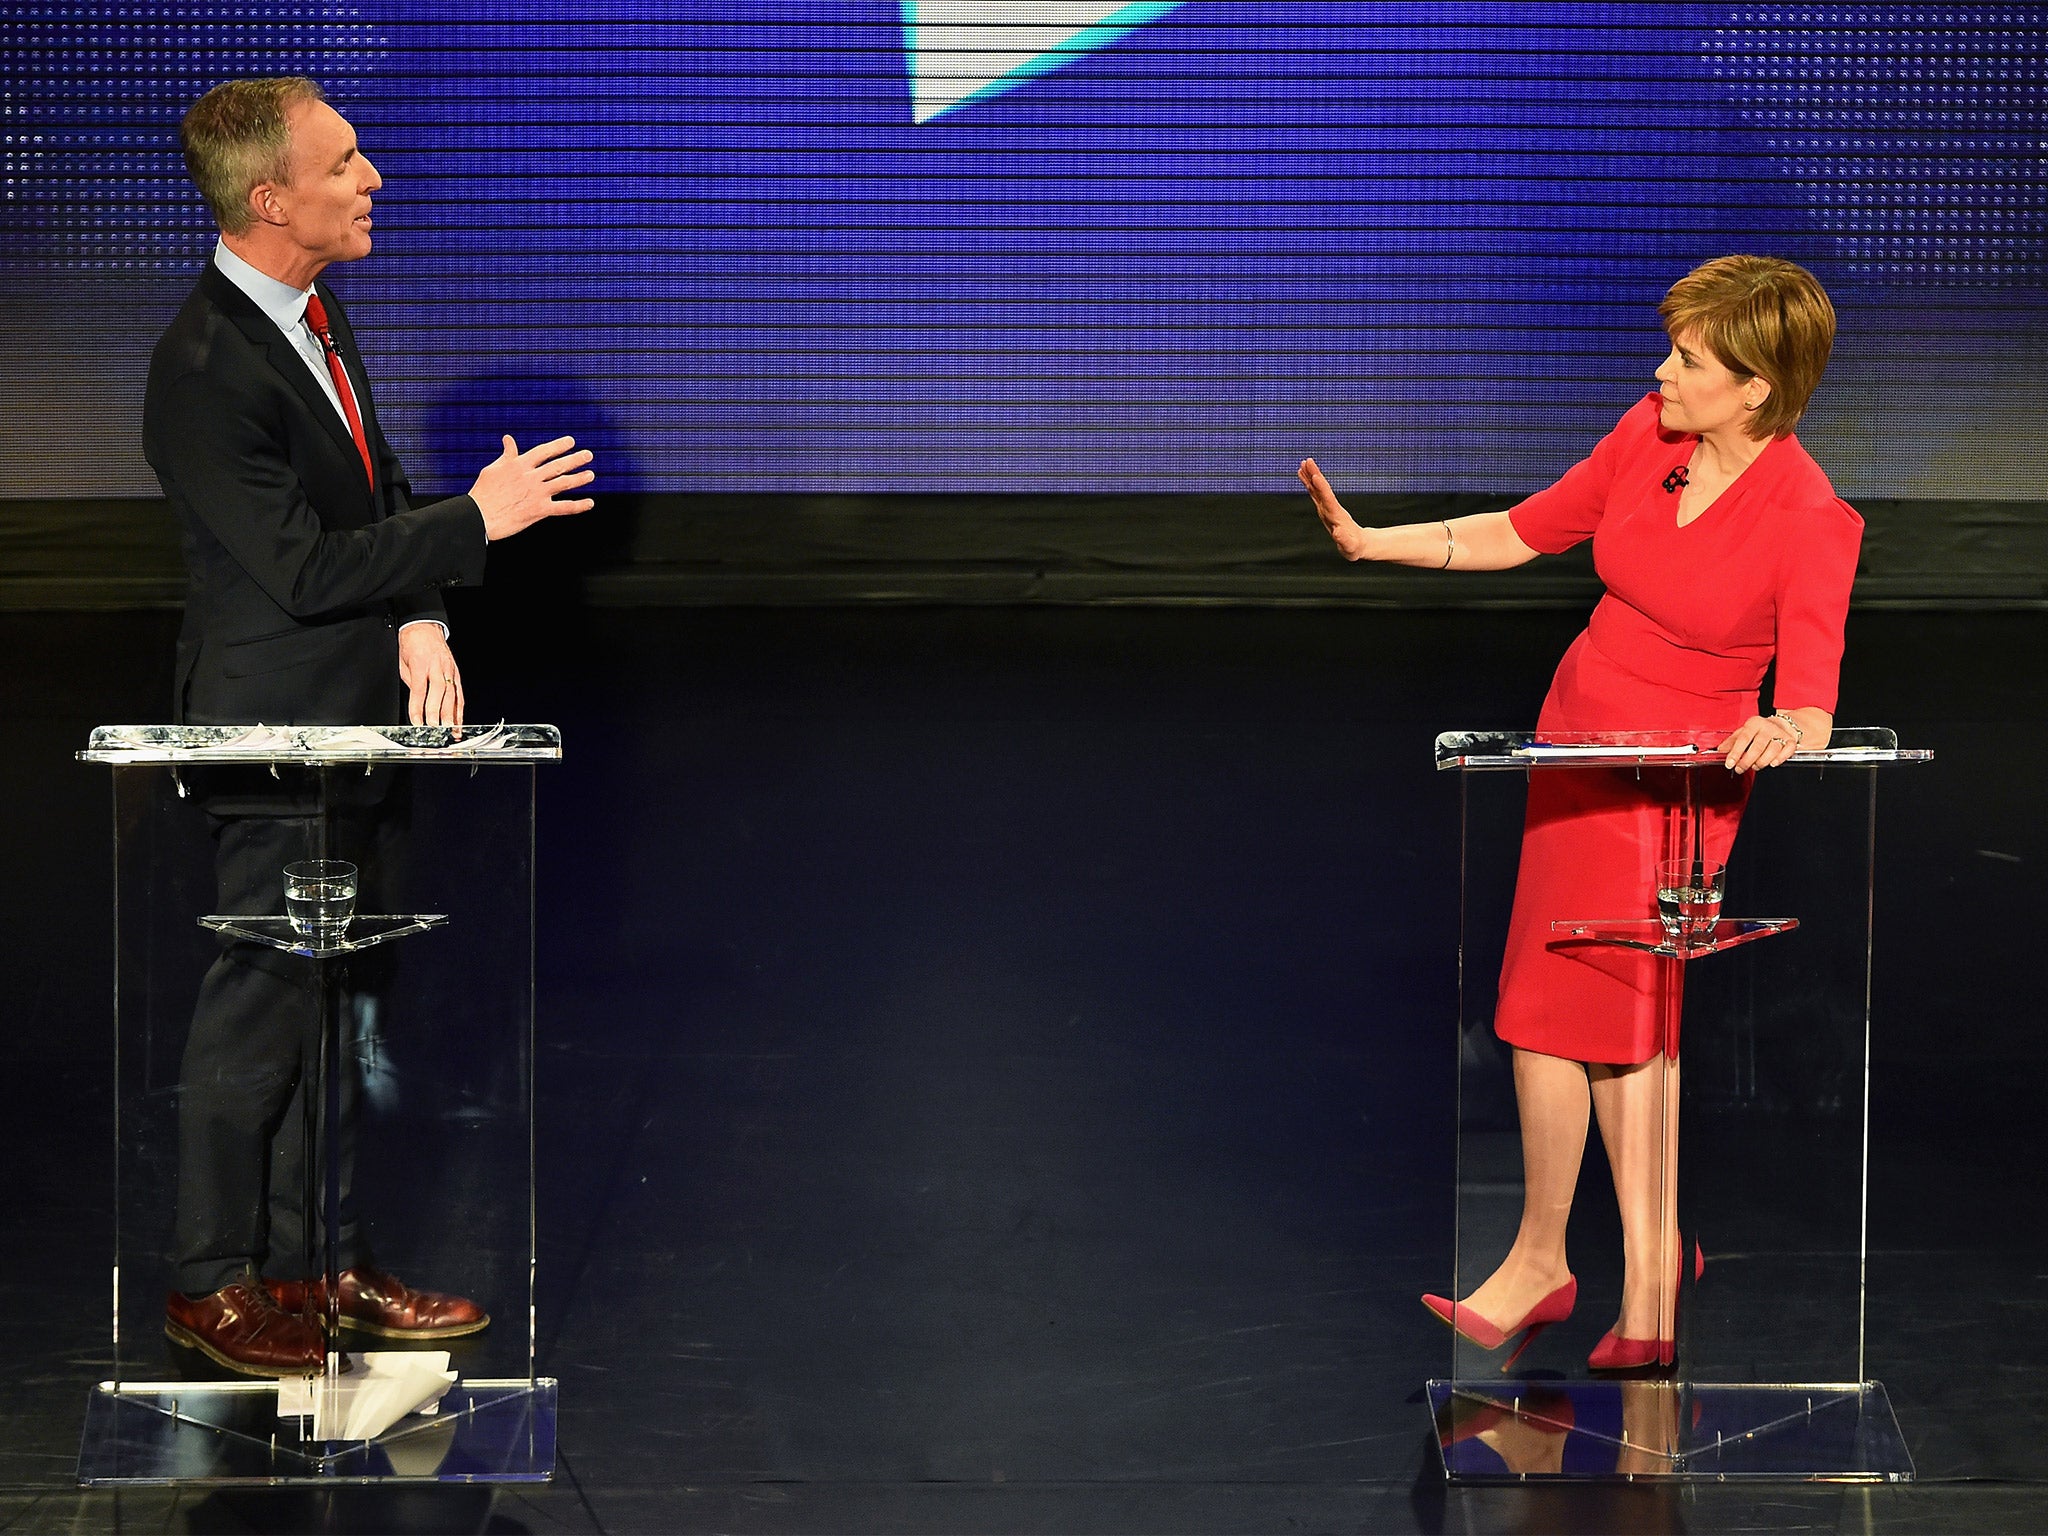 Scottish Labour leader Jim Murphy clashes with First Minister and SNP leader Nicola Sturgeon during the debate in Edinburgh